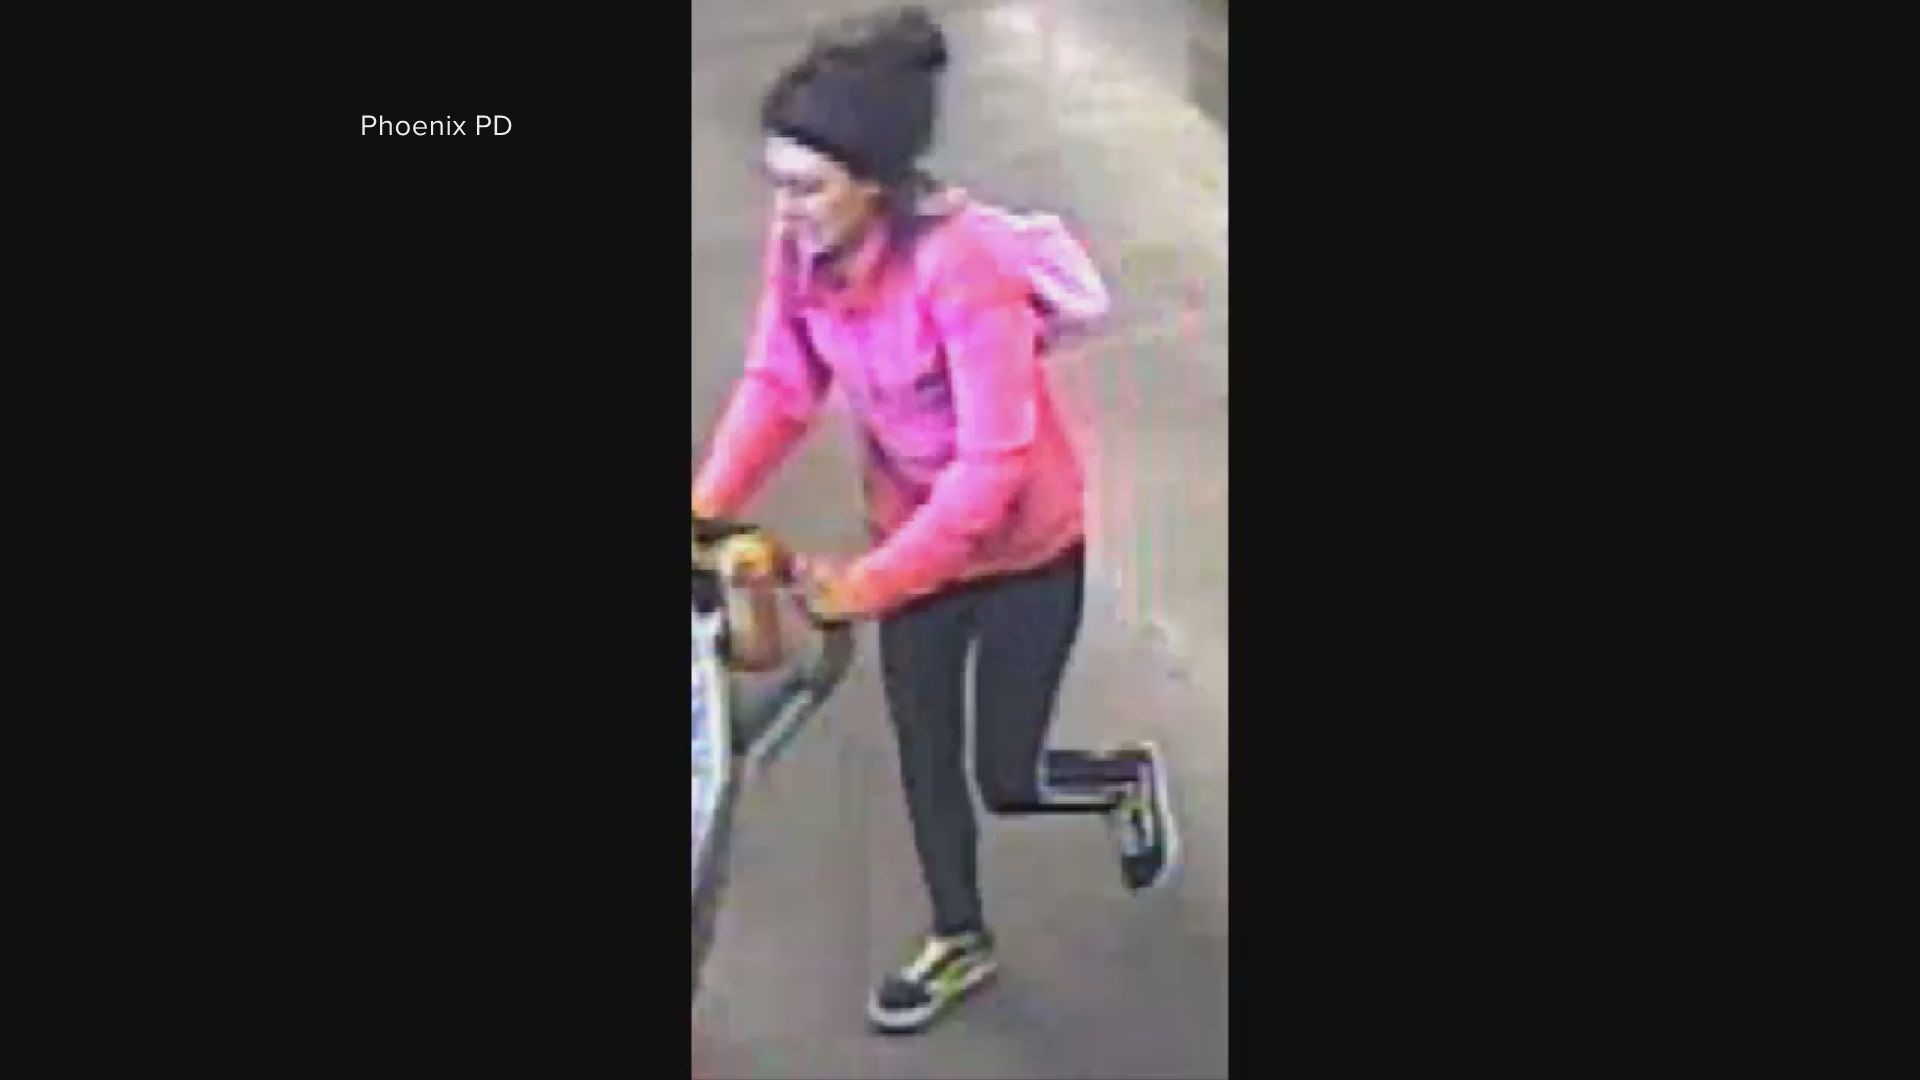 Phoenix PD has released surveillance video and a still shot of a woman last seen with a small child before he was found sleeping in a stroller with no one else around him near 1900 West Indian School Road. The child was wearing a black "Beatles" t-shirt, gray sweatpants and one gray sock. The woman is described as being between 20 and 40 years old. If you know anything call Phoenix PD.